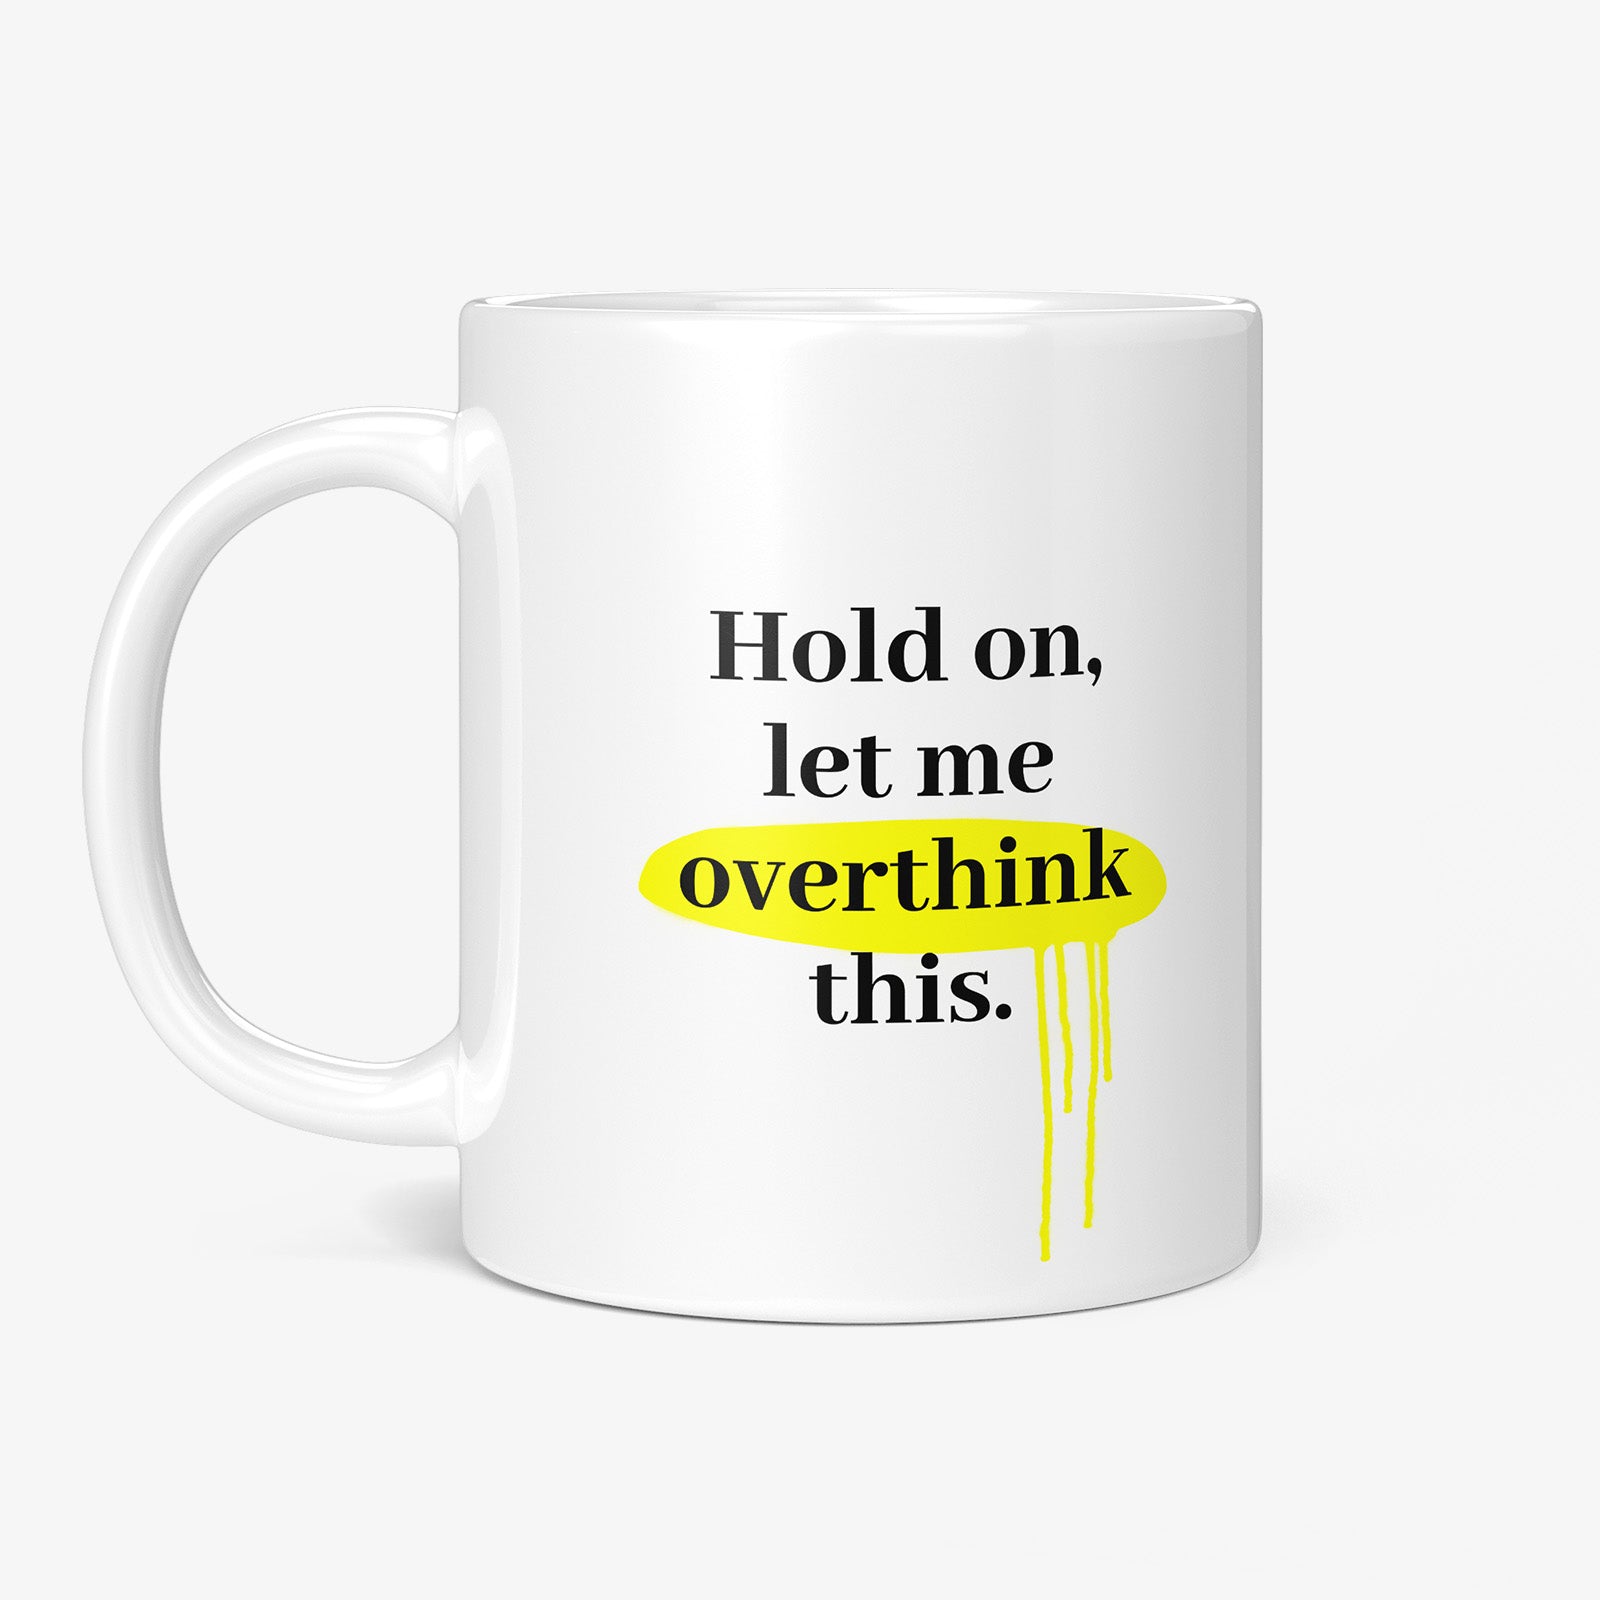 Get inspired by the quote, "Hold on, let me overthink this" on this 11oz white glossy coffee mug with the handle on the left.